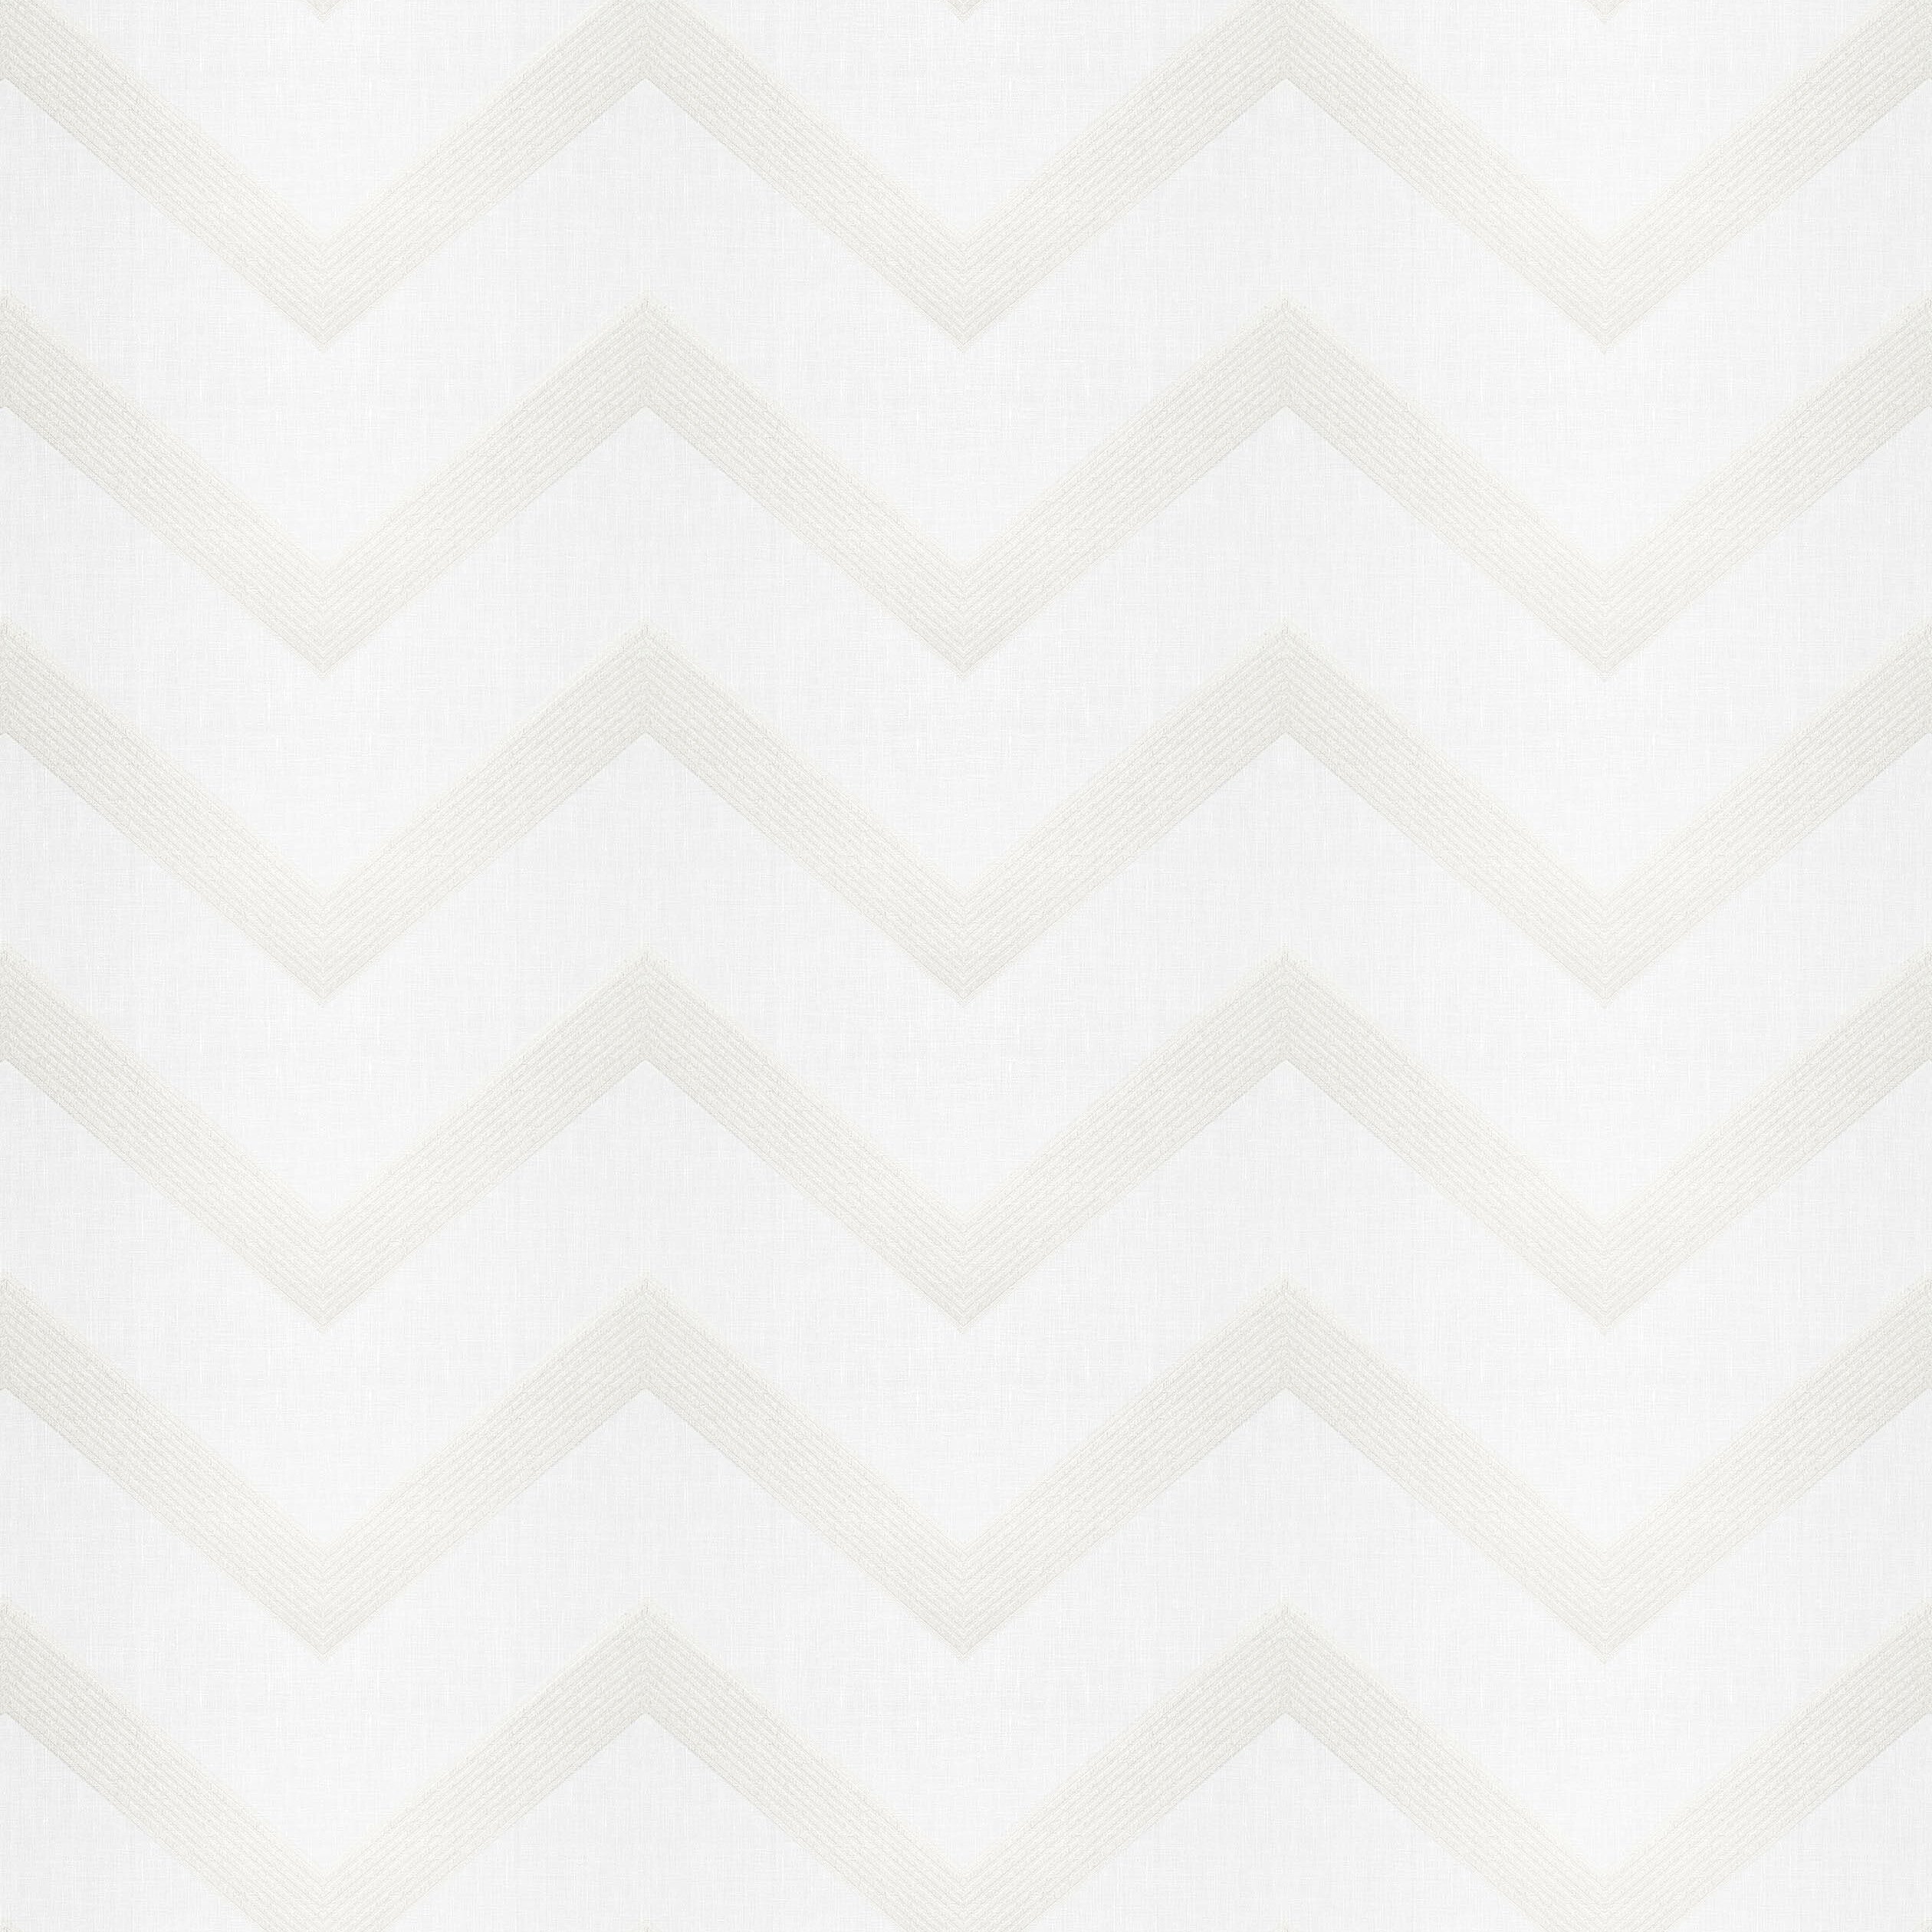 Adalar Chevron fabric in off white color - pattern number AW9129 - by Anna French in the Natural Glimmer collection